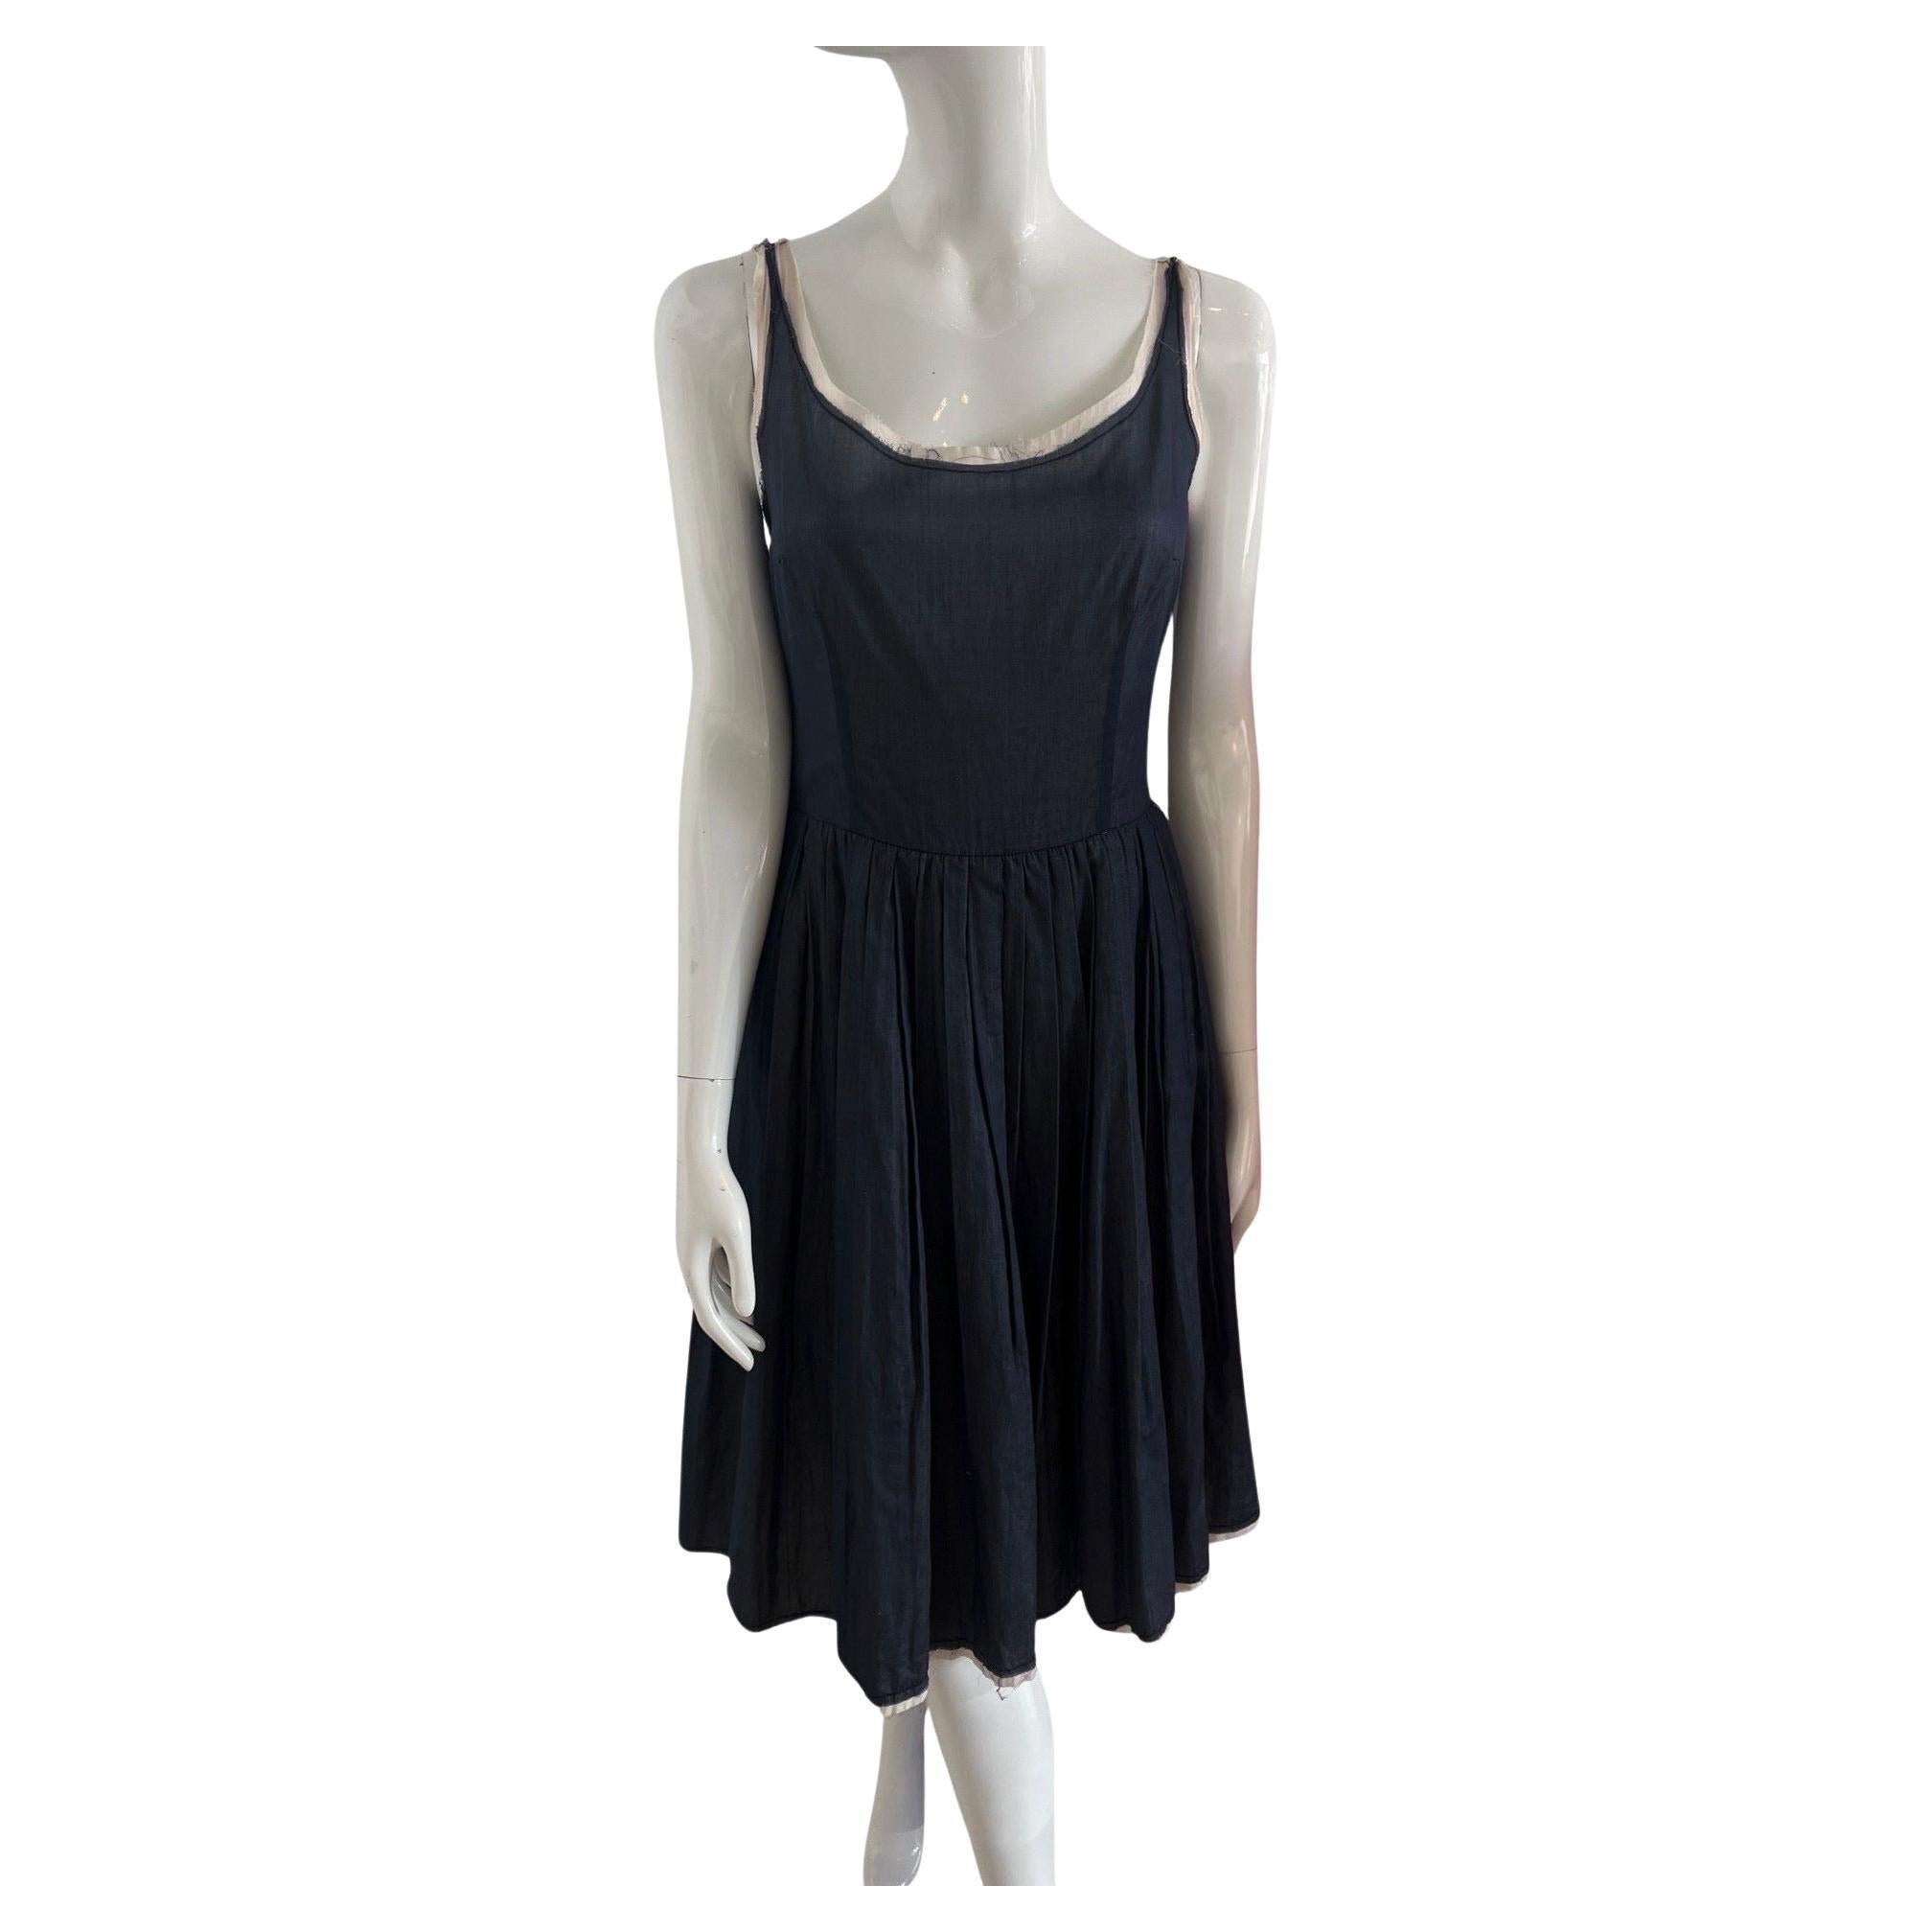 Early Y2K Prada perfect for an Italian summer.  This dress is two layers of light cotton.  The inside layer is an ecru color and the outside is a navy chambray.  The hems are unfinished.  The dress has a round neck, fitted at the waist with a zip up